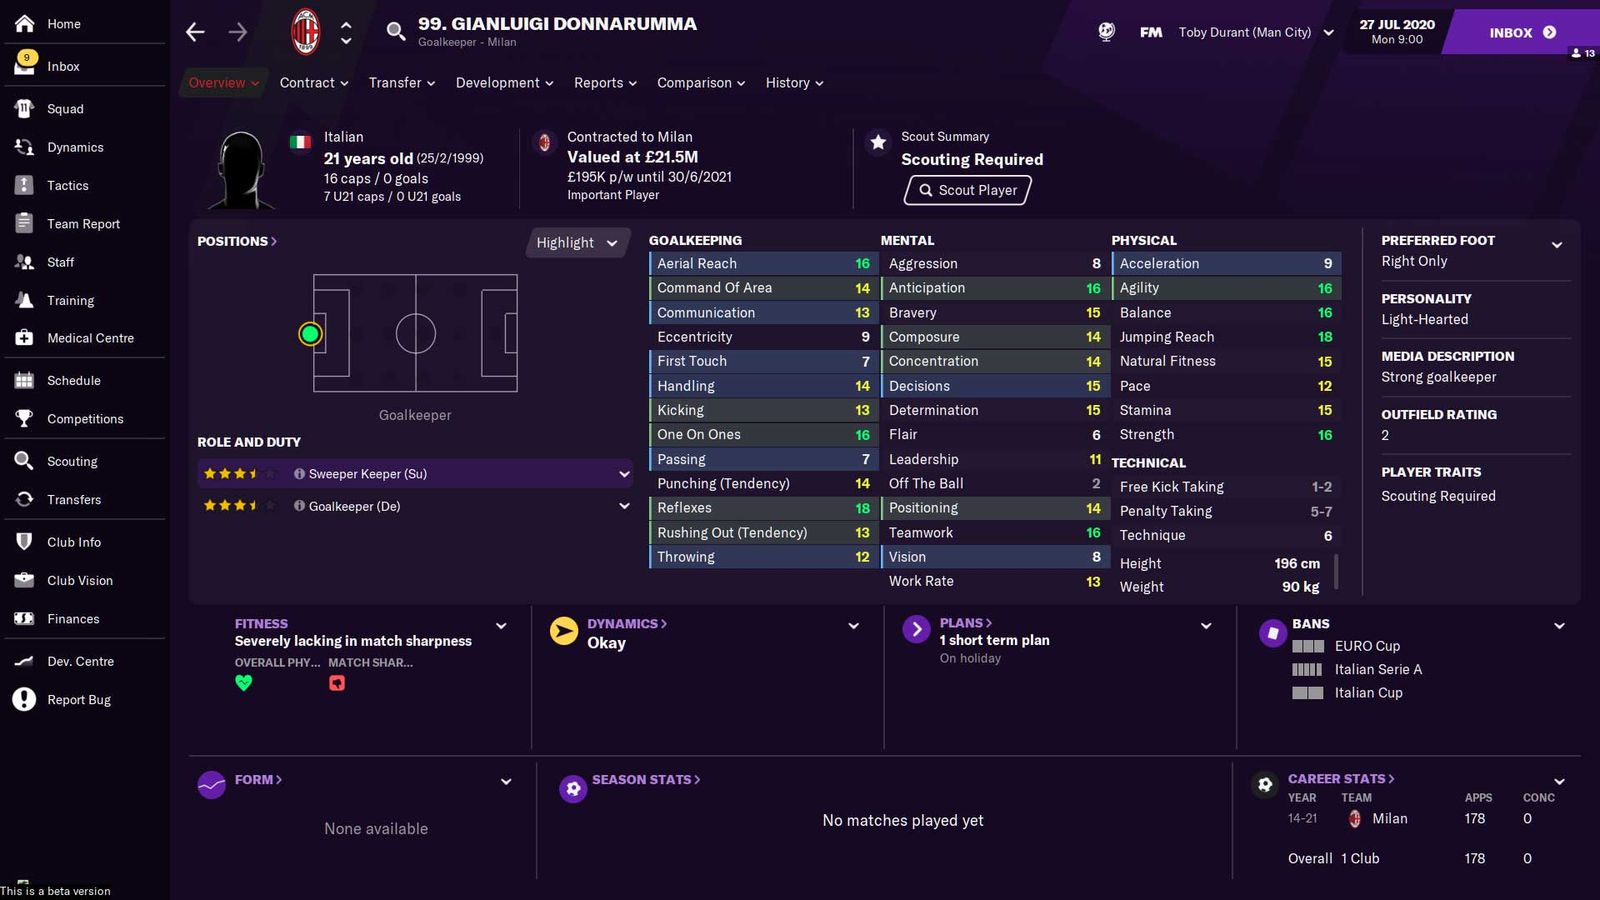 Gianluigi Donnarumma's stats in Football Manager 2021